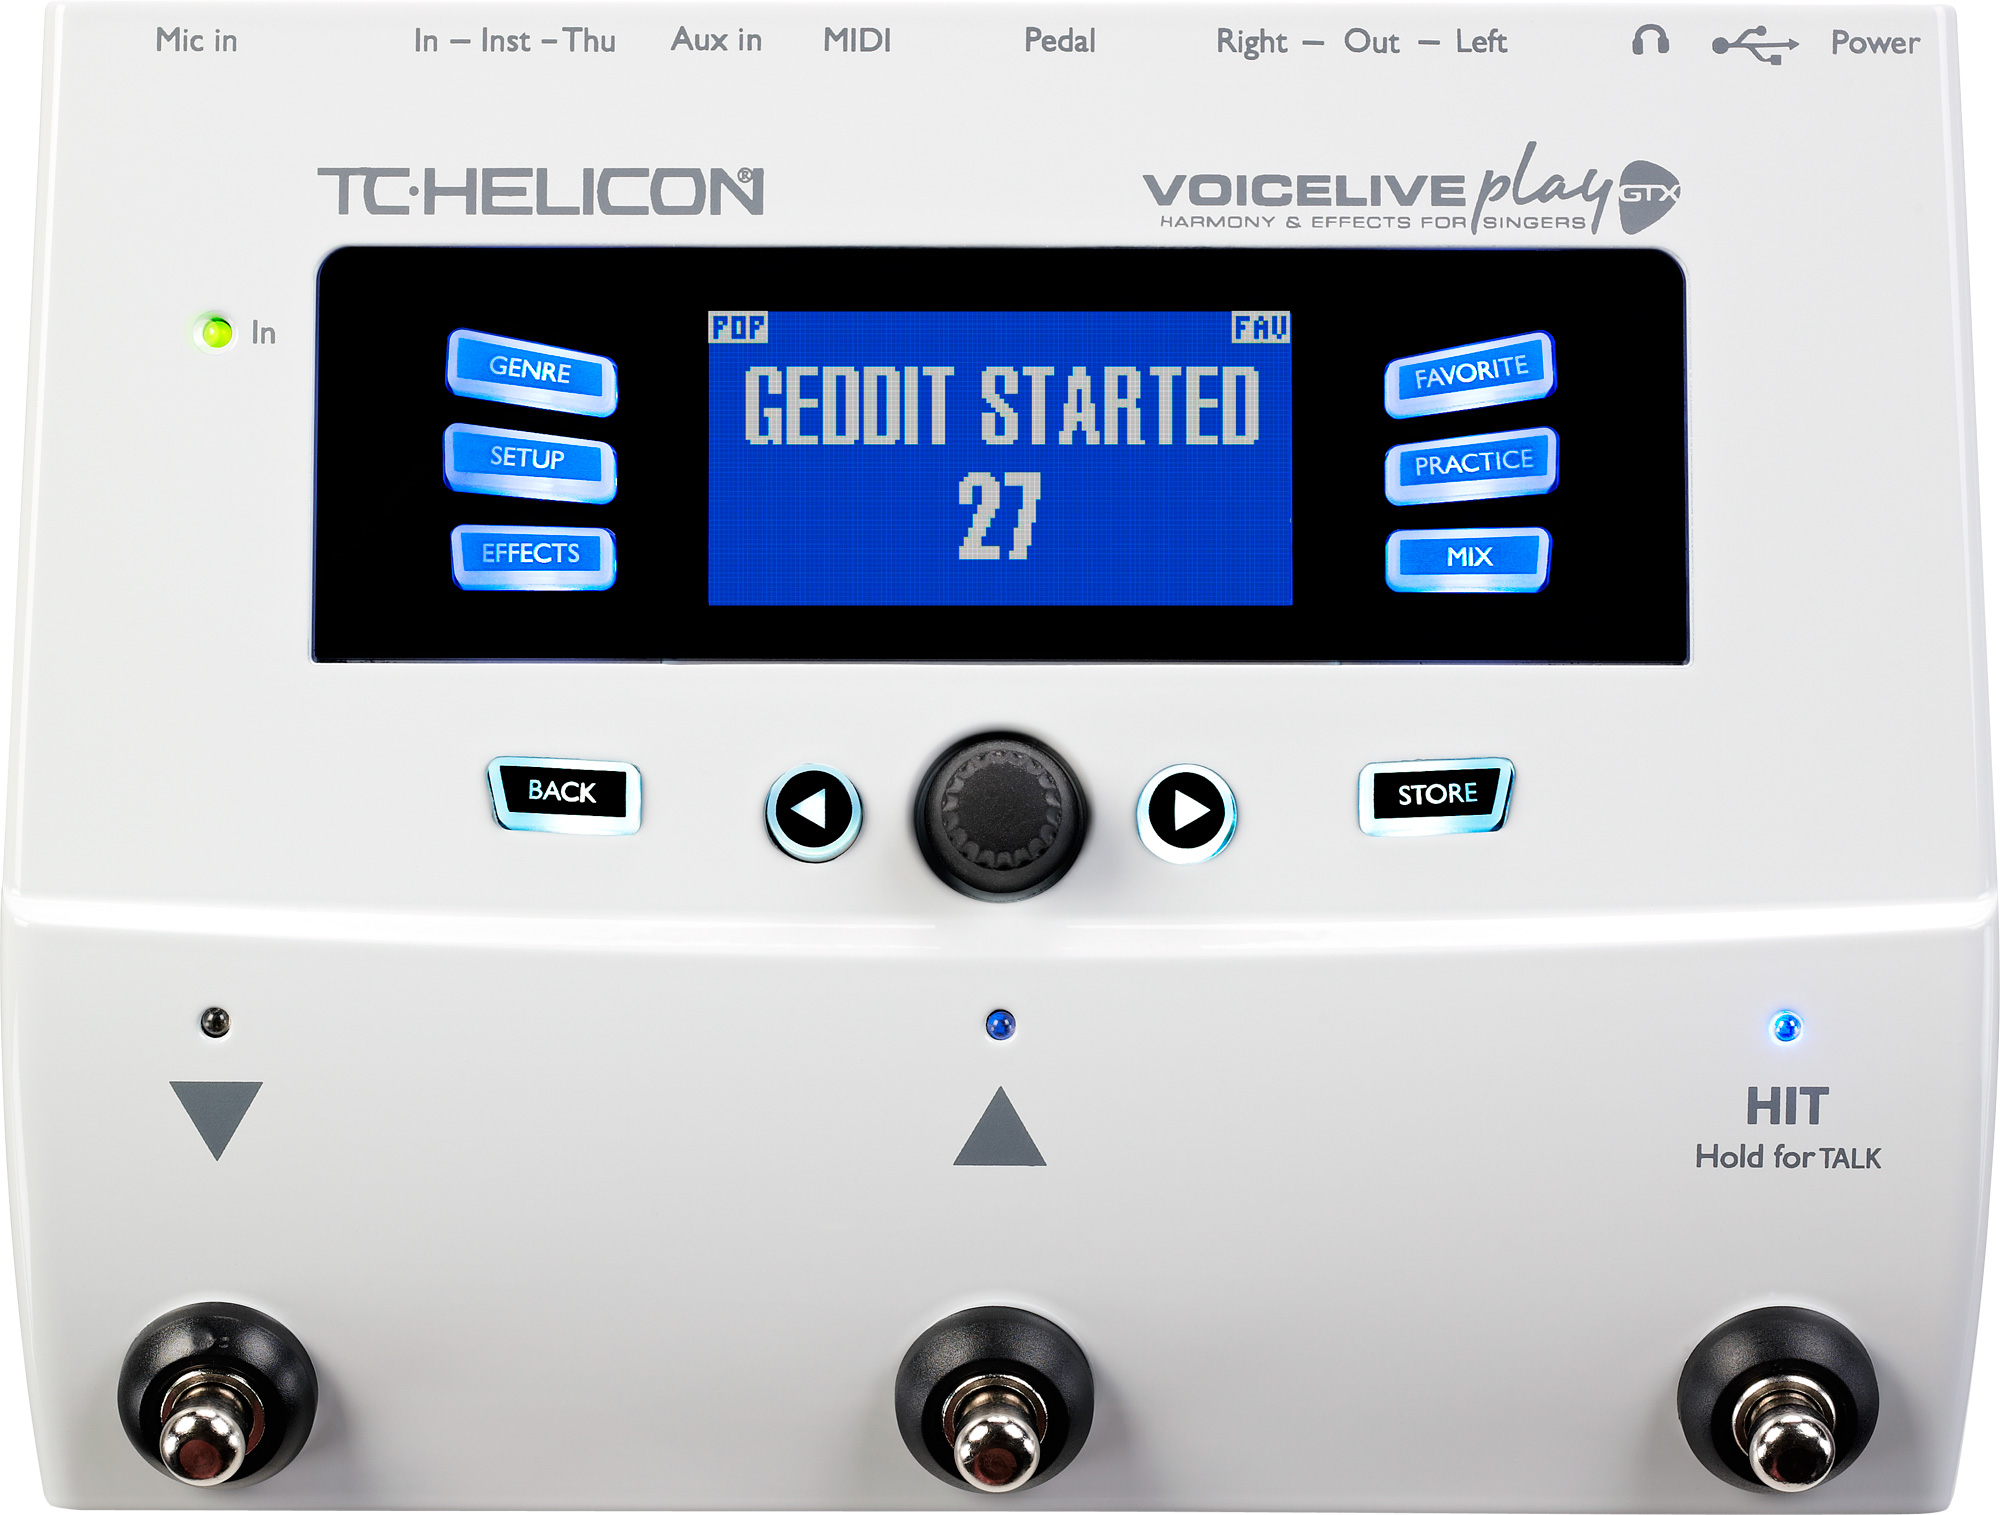 TC HELICON VOICELIVE play GTX - positivecreations.ca